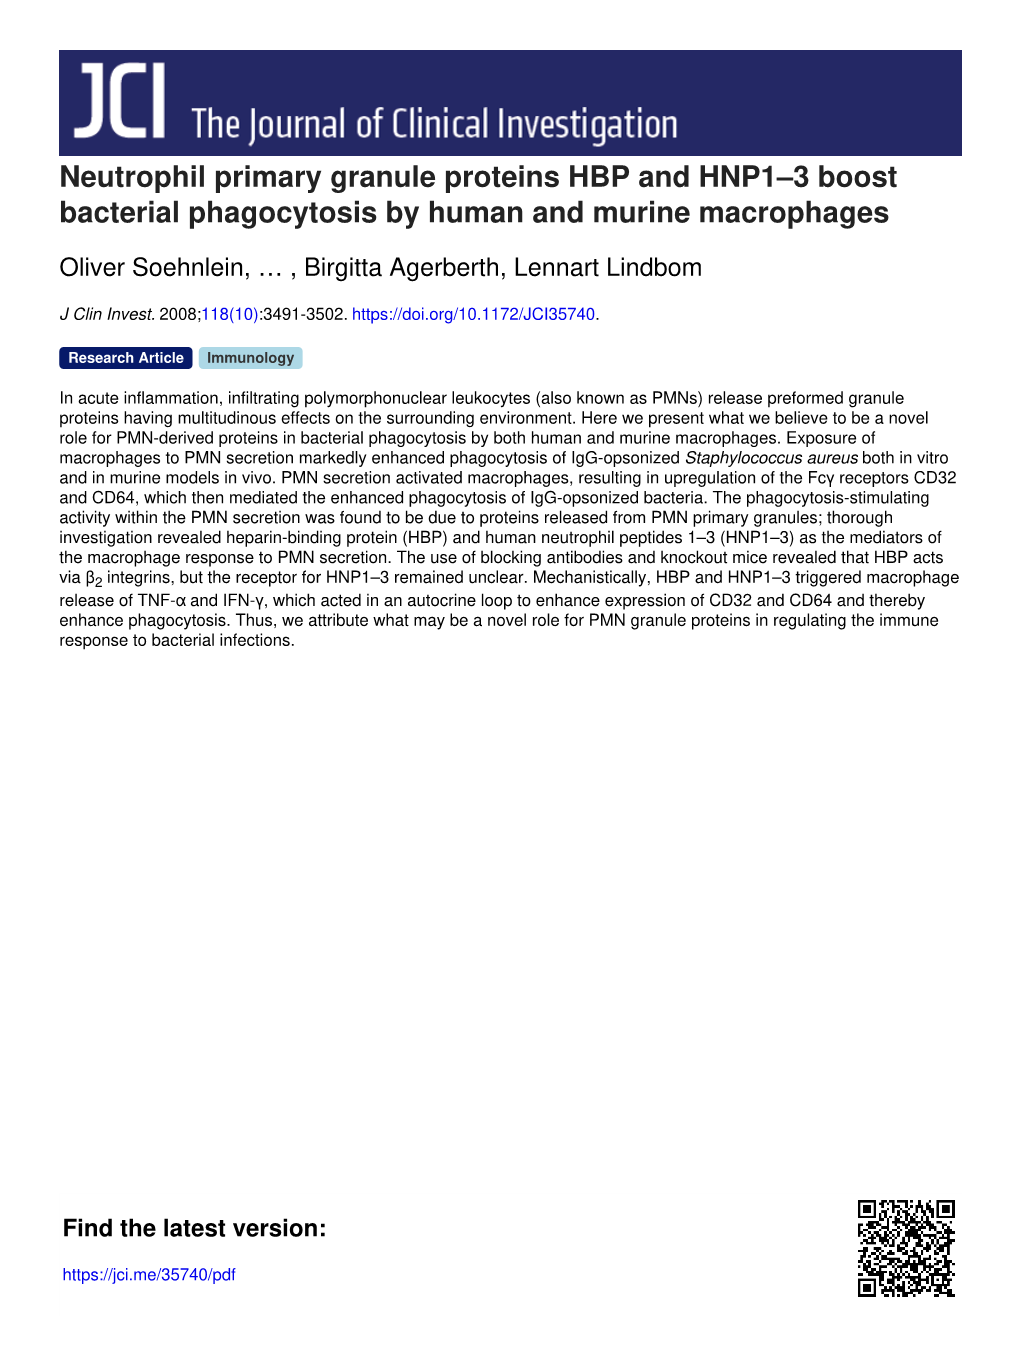 Neutrophil Primary Granule Proteins HBP and HNP1–3 Boost Bacterial Phagocytosis by Human and Murine Macrophages